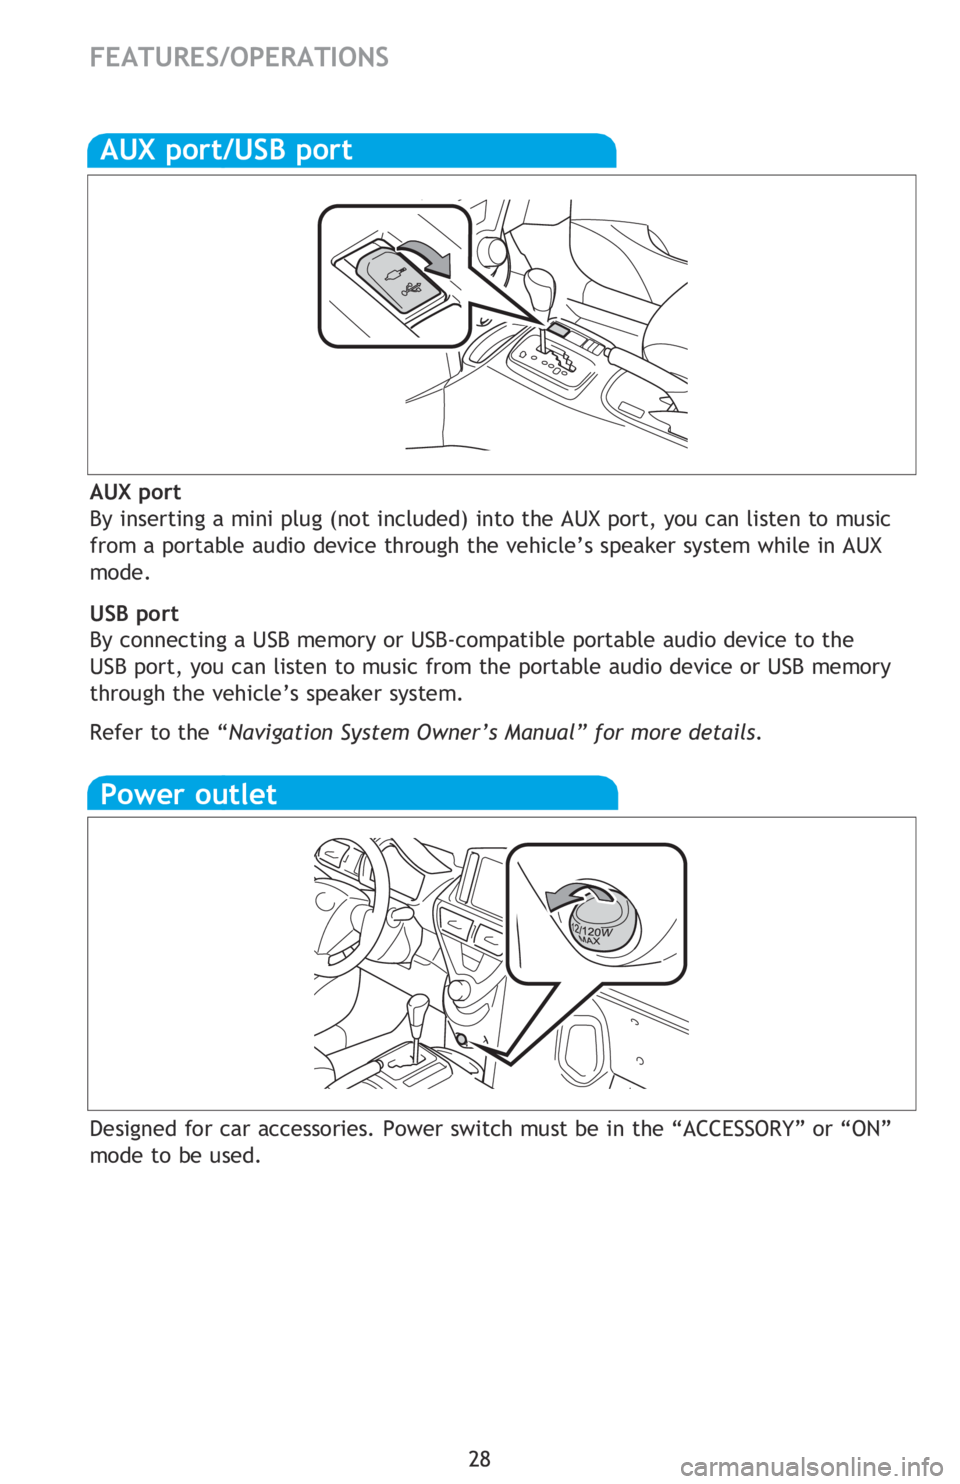 TOYOTA iQ EV 2013  Owners Manual (in English) 28
Bottle holders
Cup holder
Front
HAC helps prevent rolling backwards on an incline. To engage, push further down 
on brake pedal while at a complete stop until a beep sounds and slip indicator 
illu